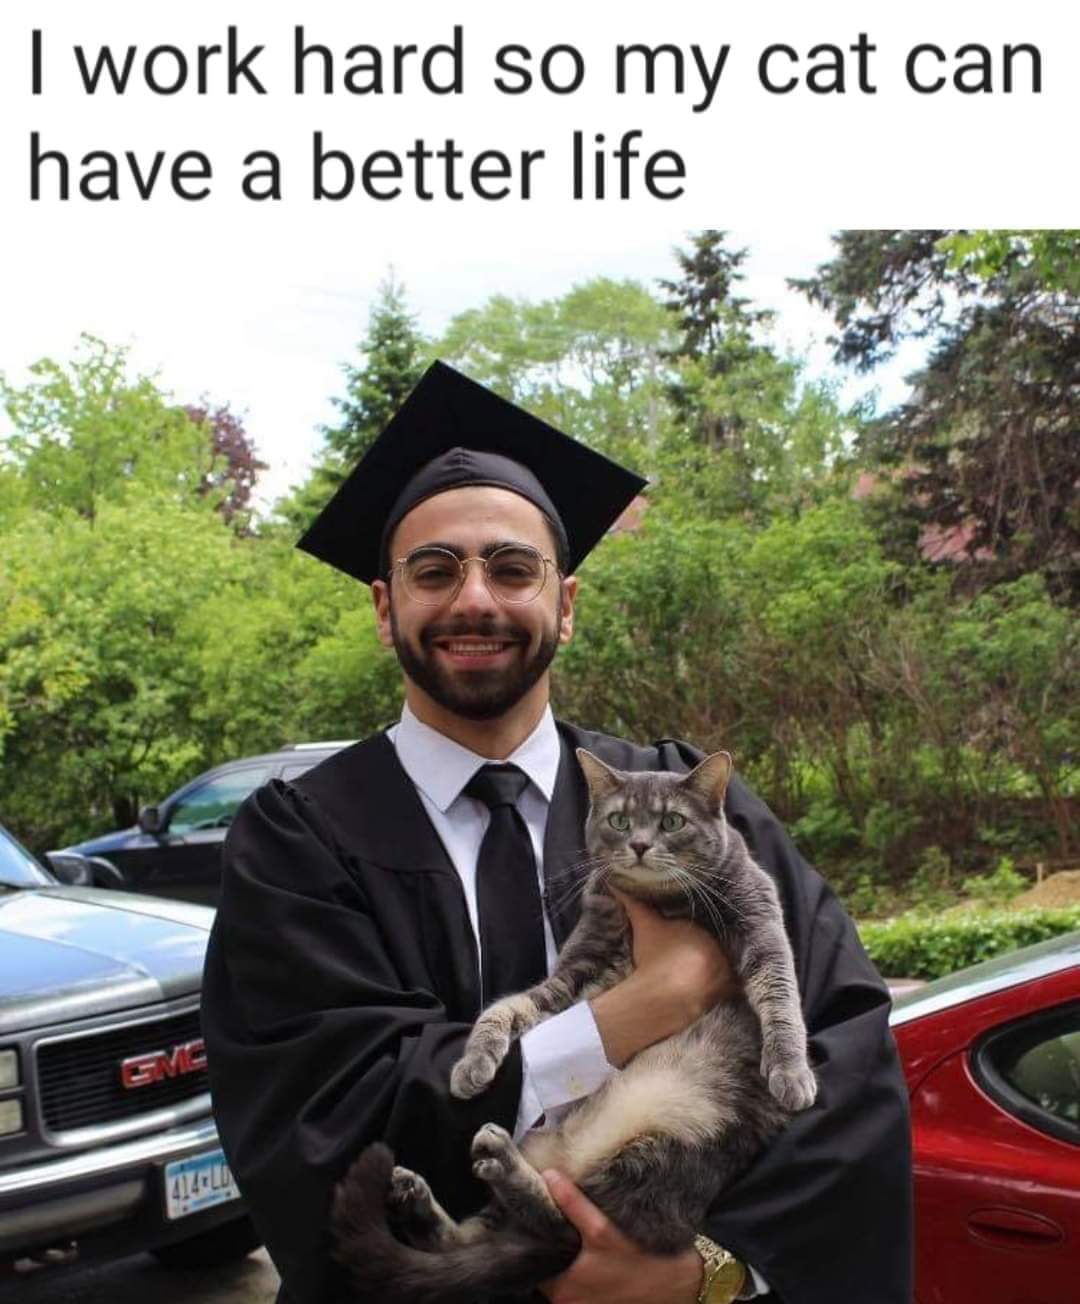 photo caption - I work hard so my cat can have a better life